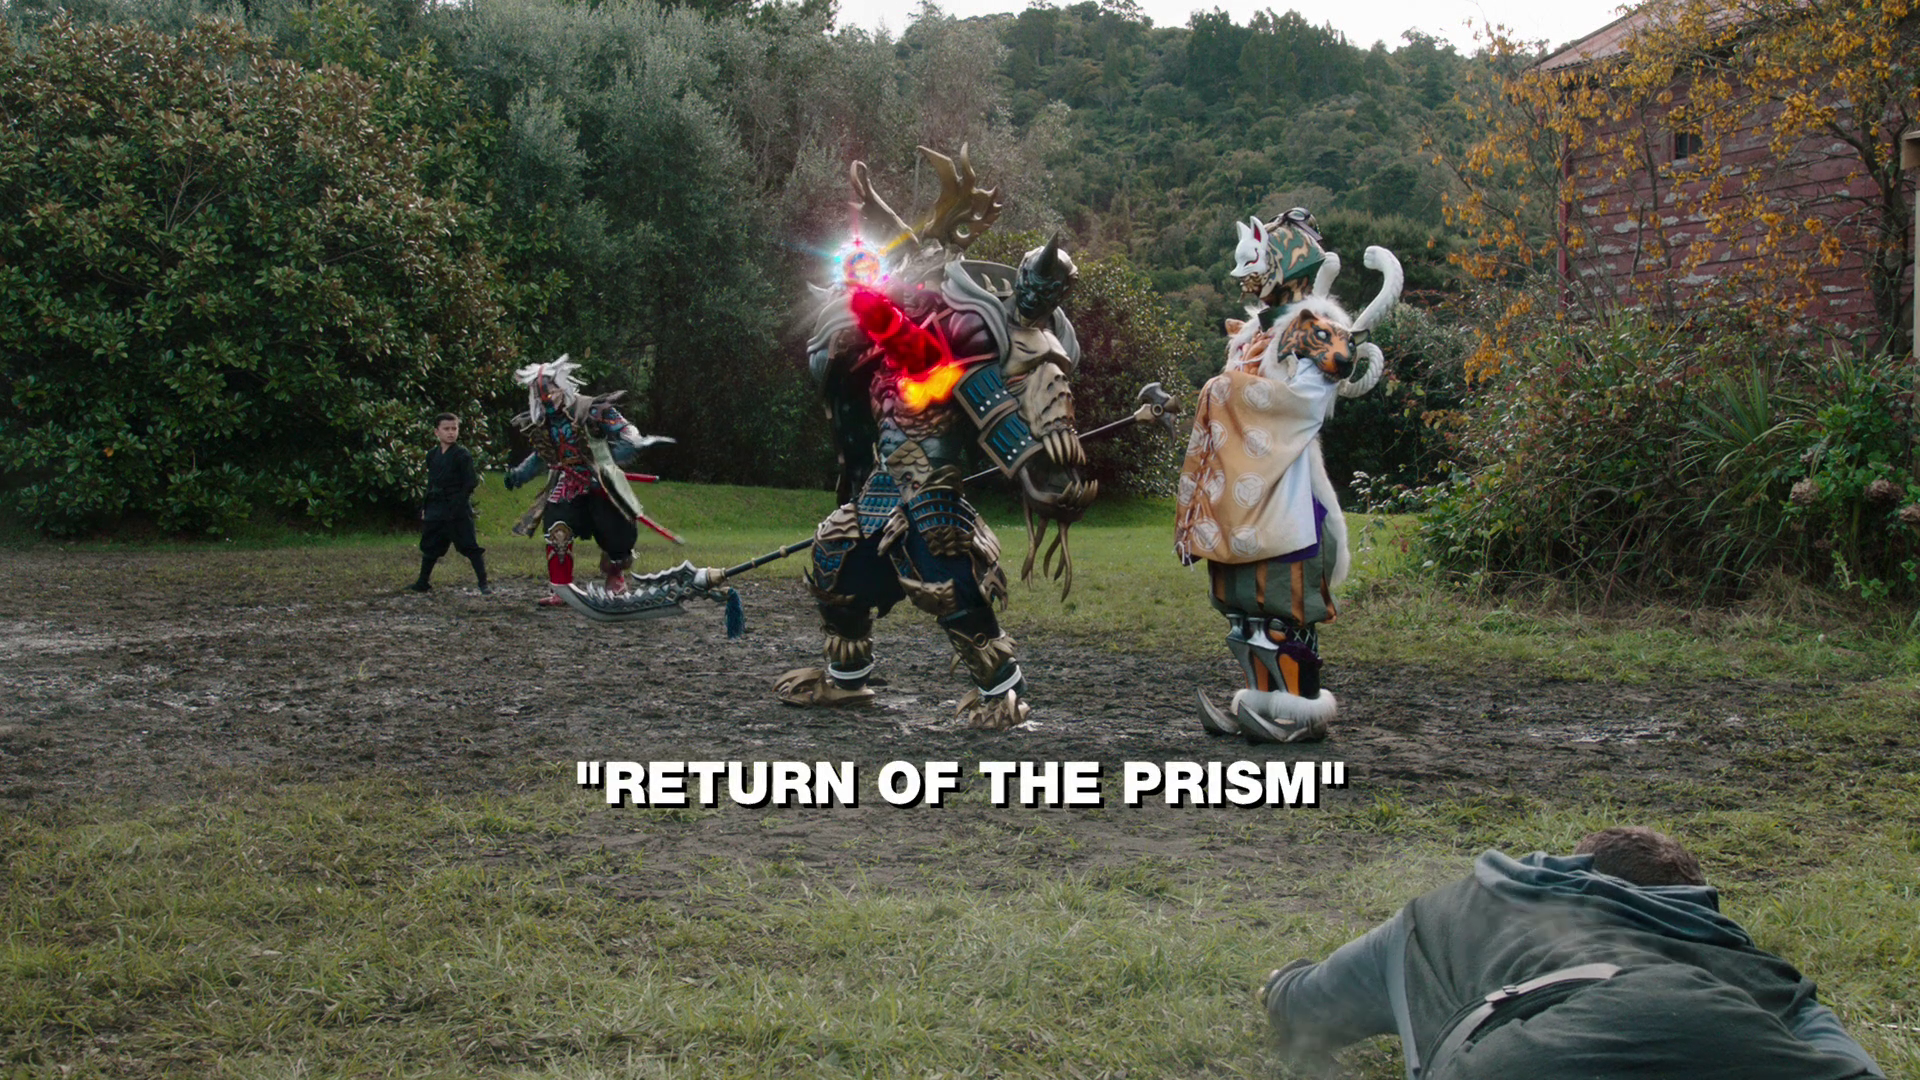 https://morphinlegacy.com/wp-content/uploads/2021/06/Return-Of-The-Prism.png